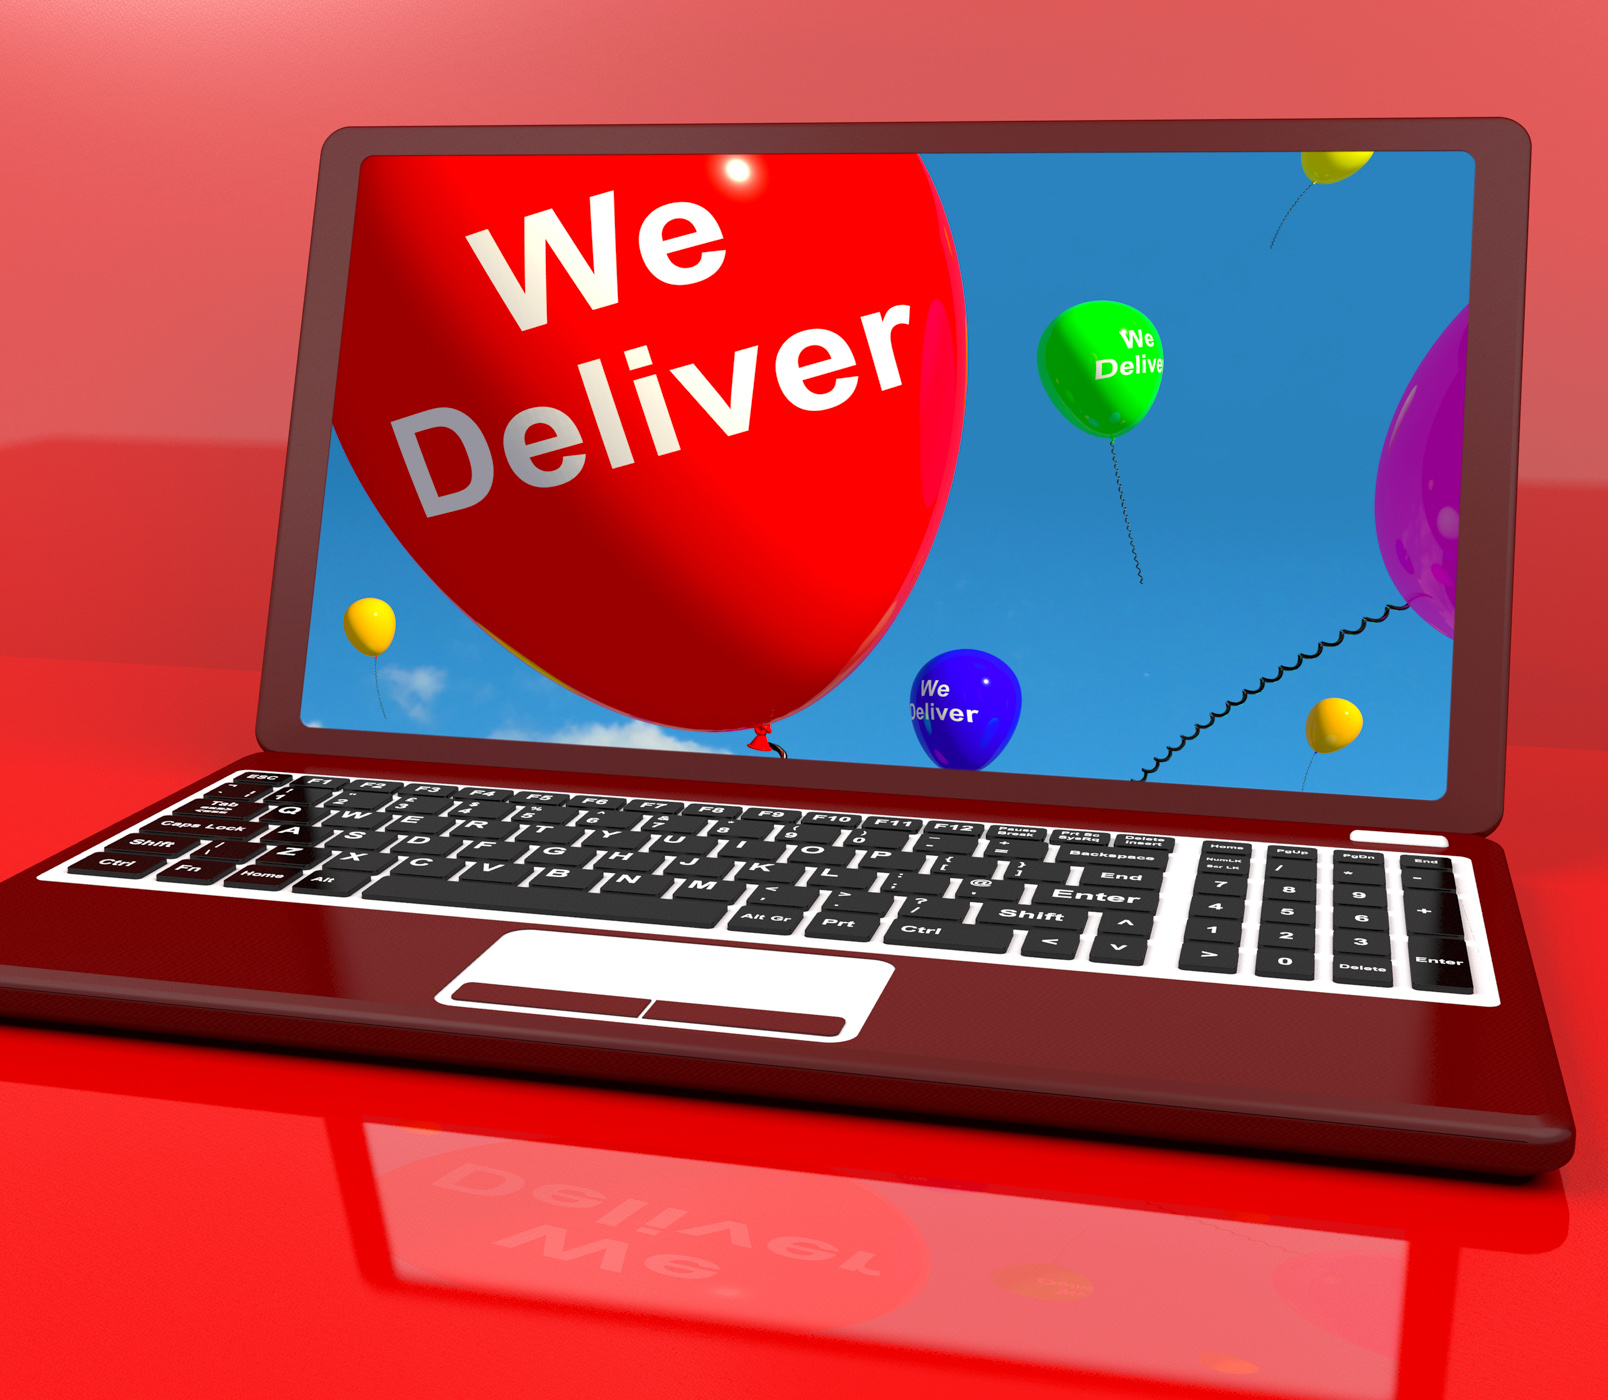 We deliver balloons on computer showing delivery shipping service or l photo